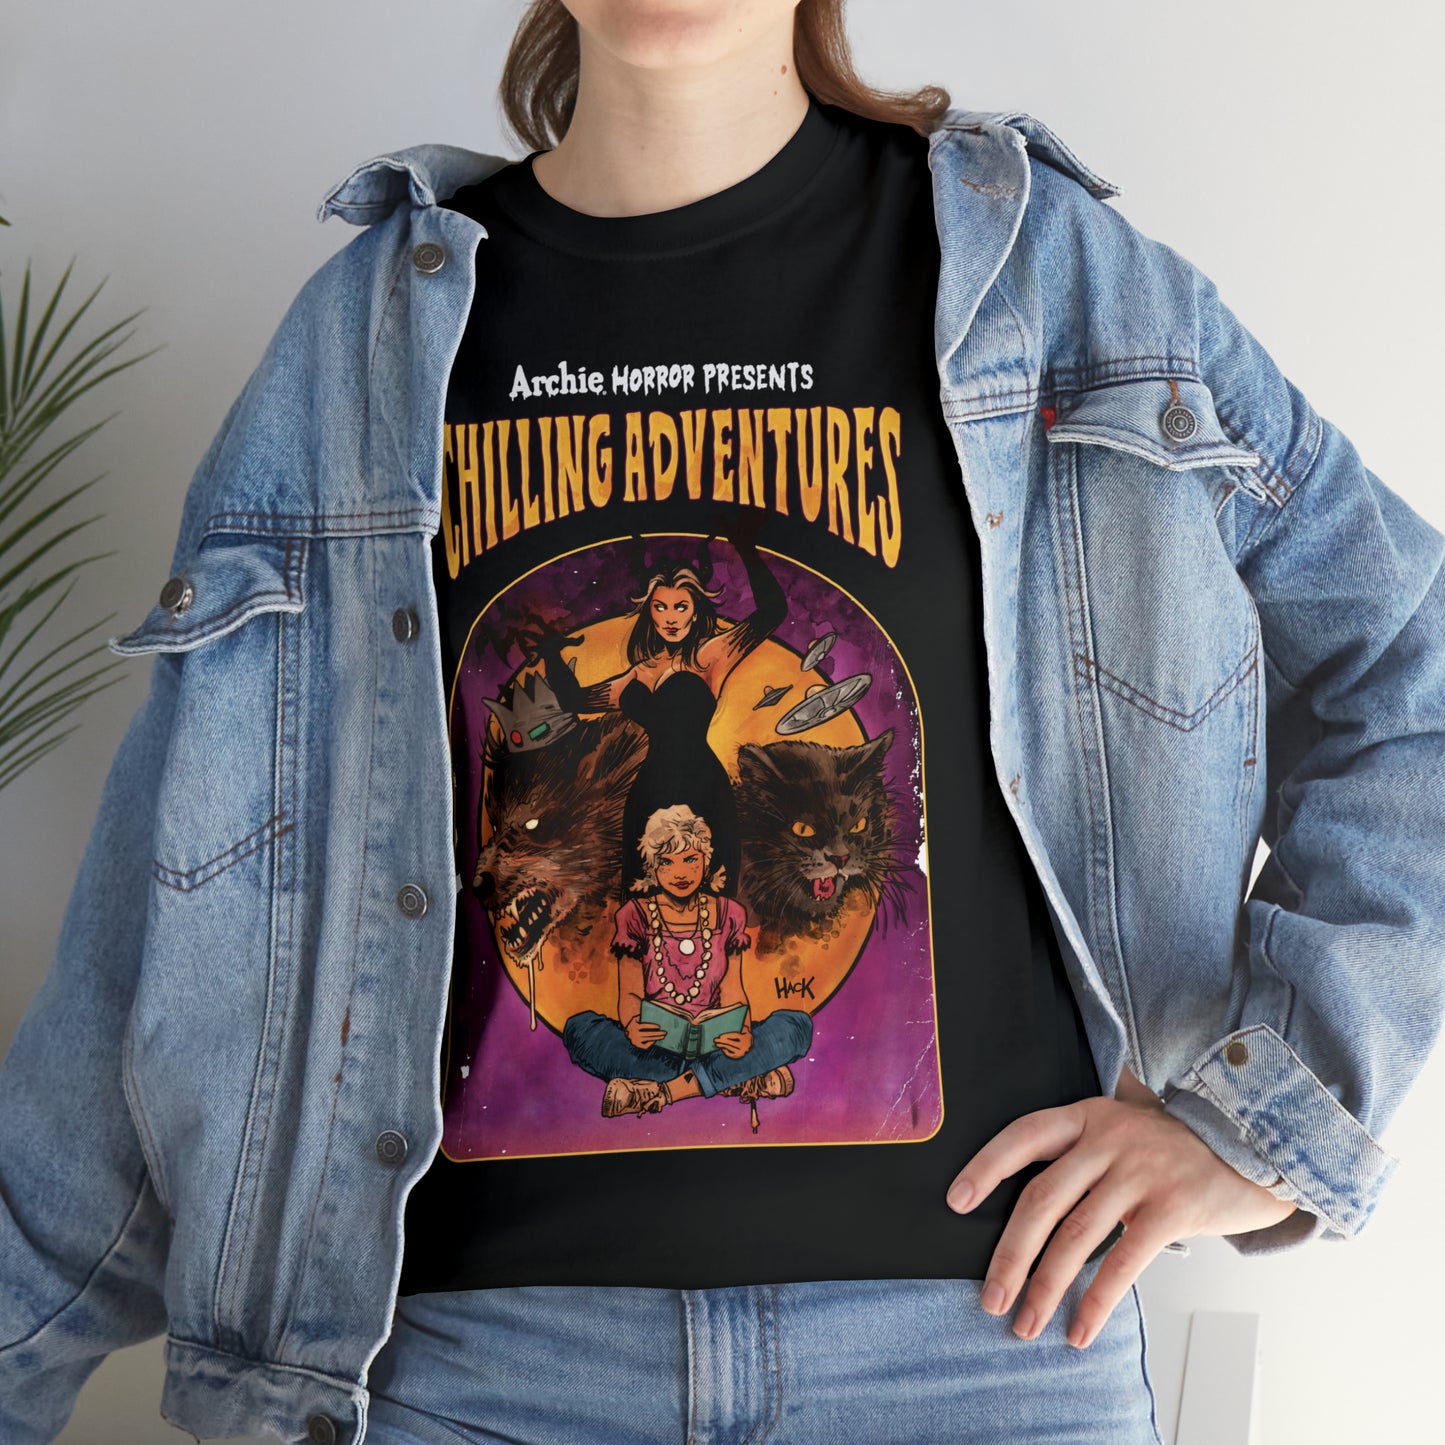 Archie Horror Presents Chilling Adventures Graphic Tee (Unisex Heavy Cotton Tee) featuring Jinx and Madam Satan